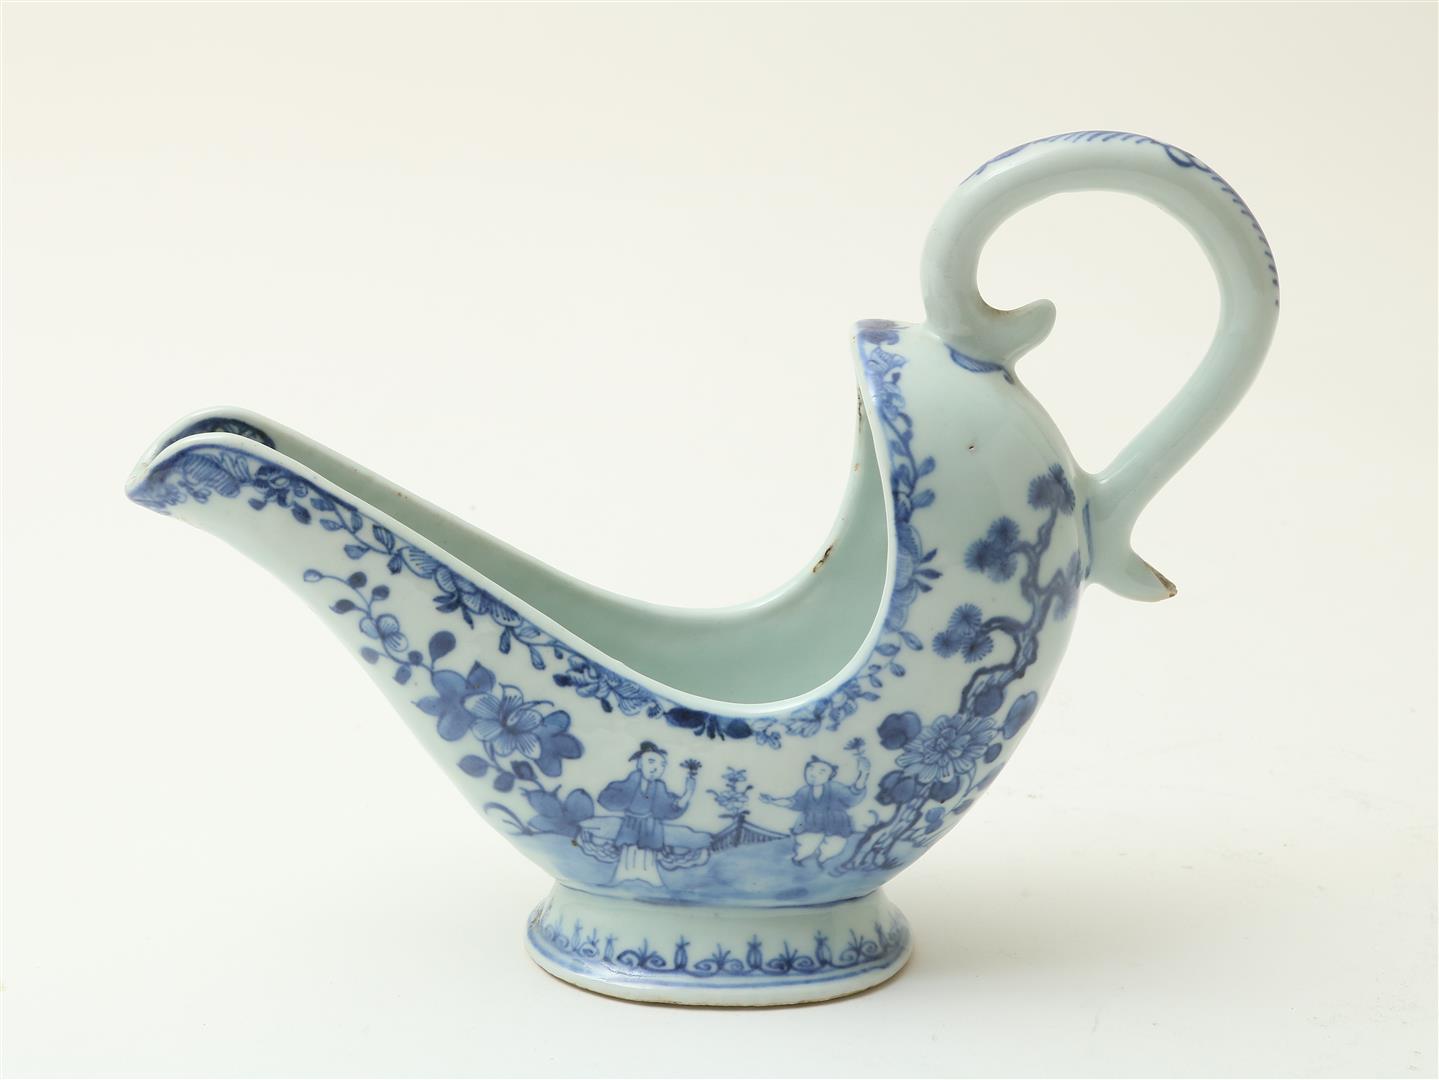 Porcelain Qianlong sauce boat with scrolling handles, blue white decor of Long Lisa and child, - Image 2 of 5